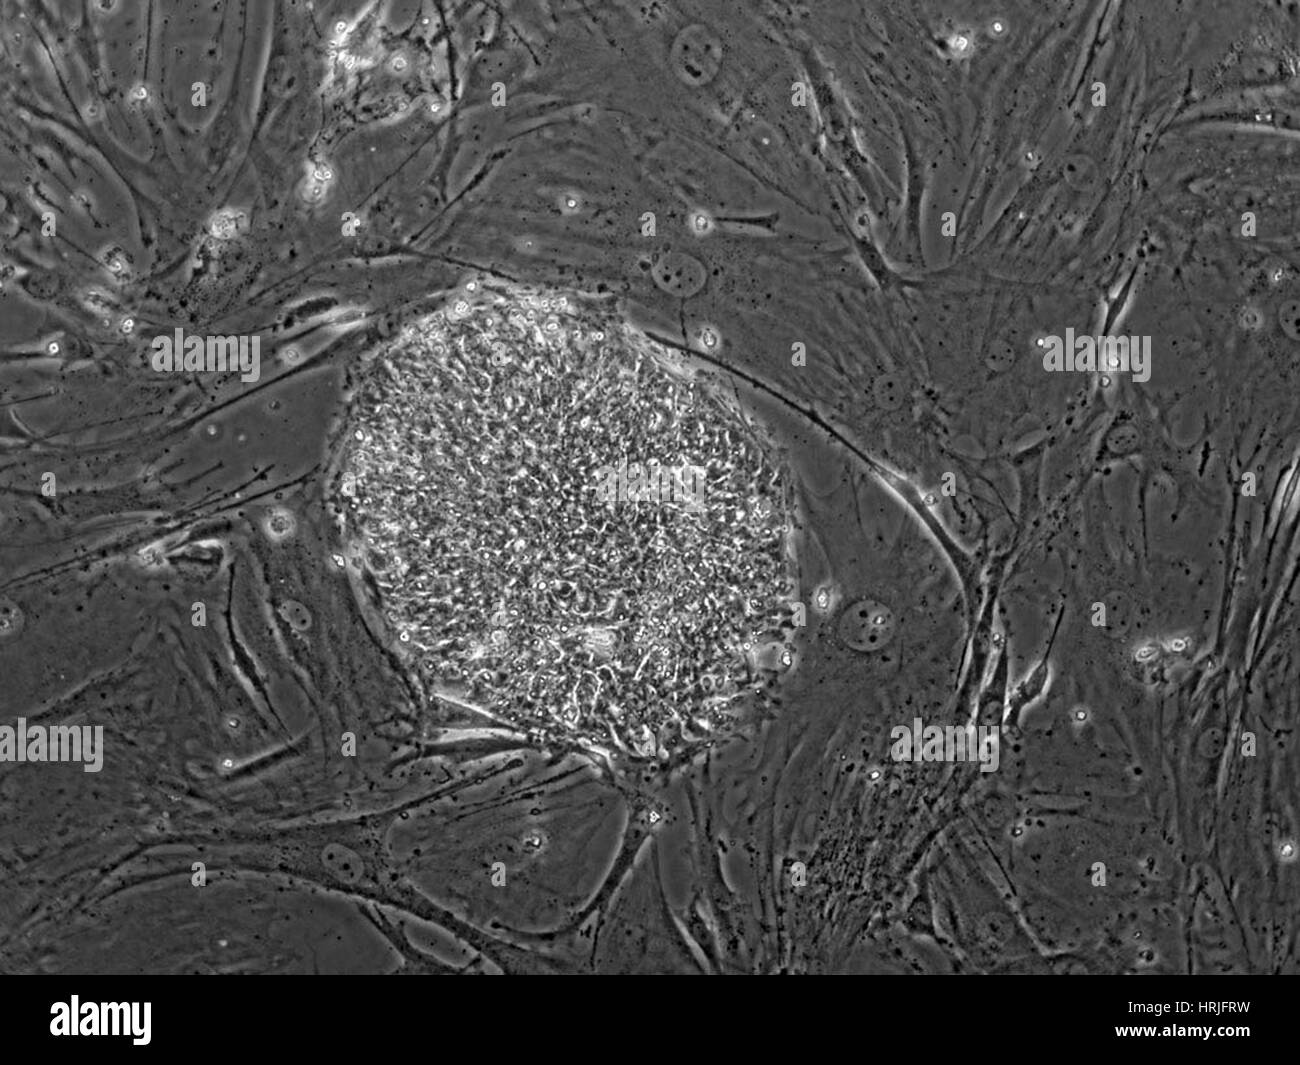 Human Embryonic Stem Cell Line TE06 Stock Photo